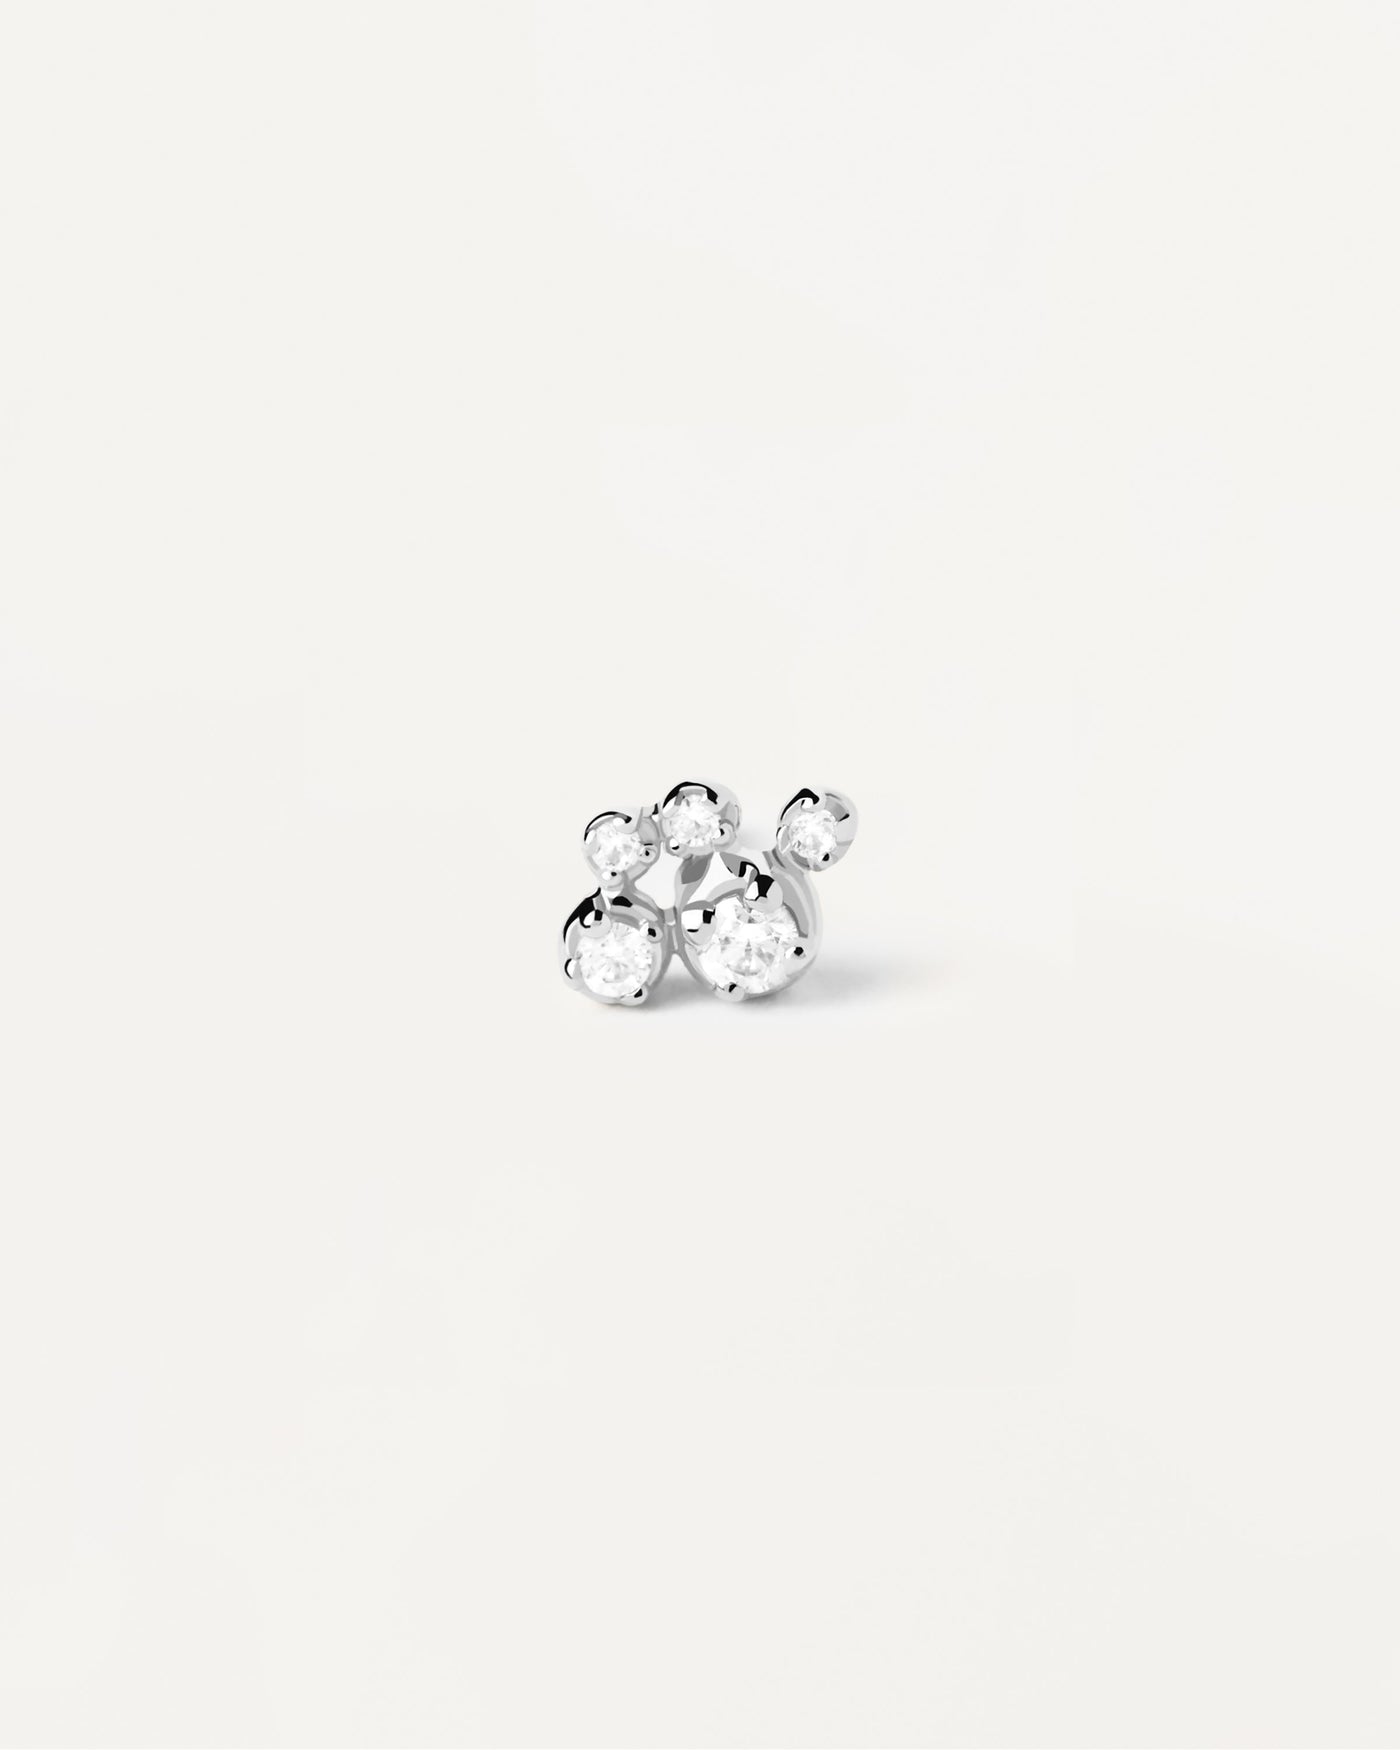 2023 Selection | Bubble silver single stud Earring. Sterling silver shiny ear piercing with white zirconia. Get the latest arrival from PDPAOLA. Place your order safely and get this Best Seller. Free Shipping.